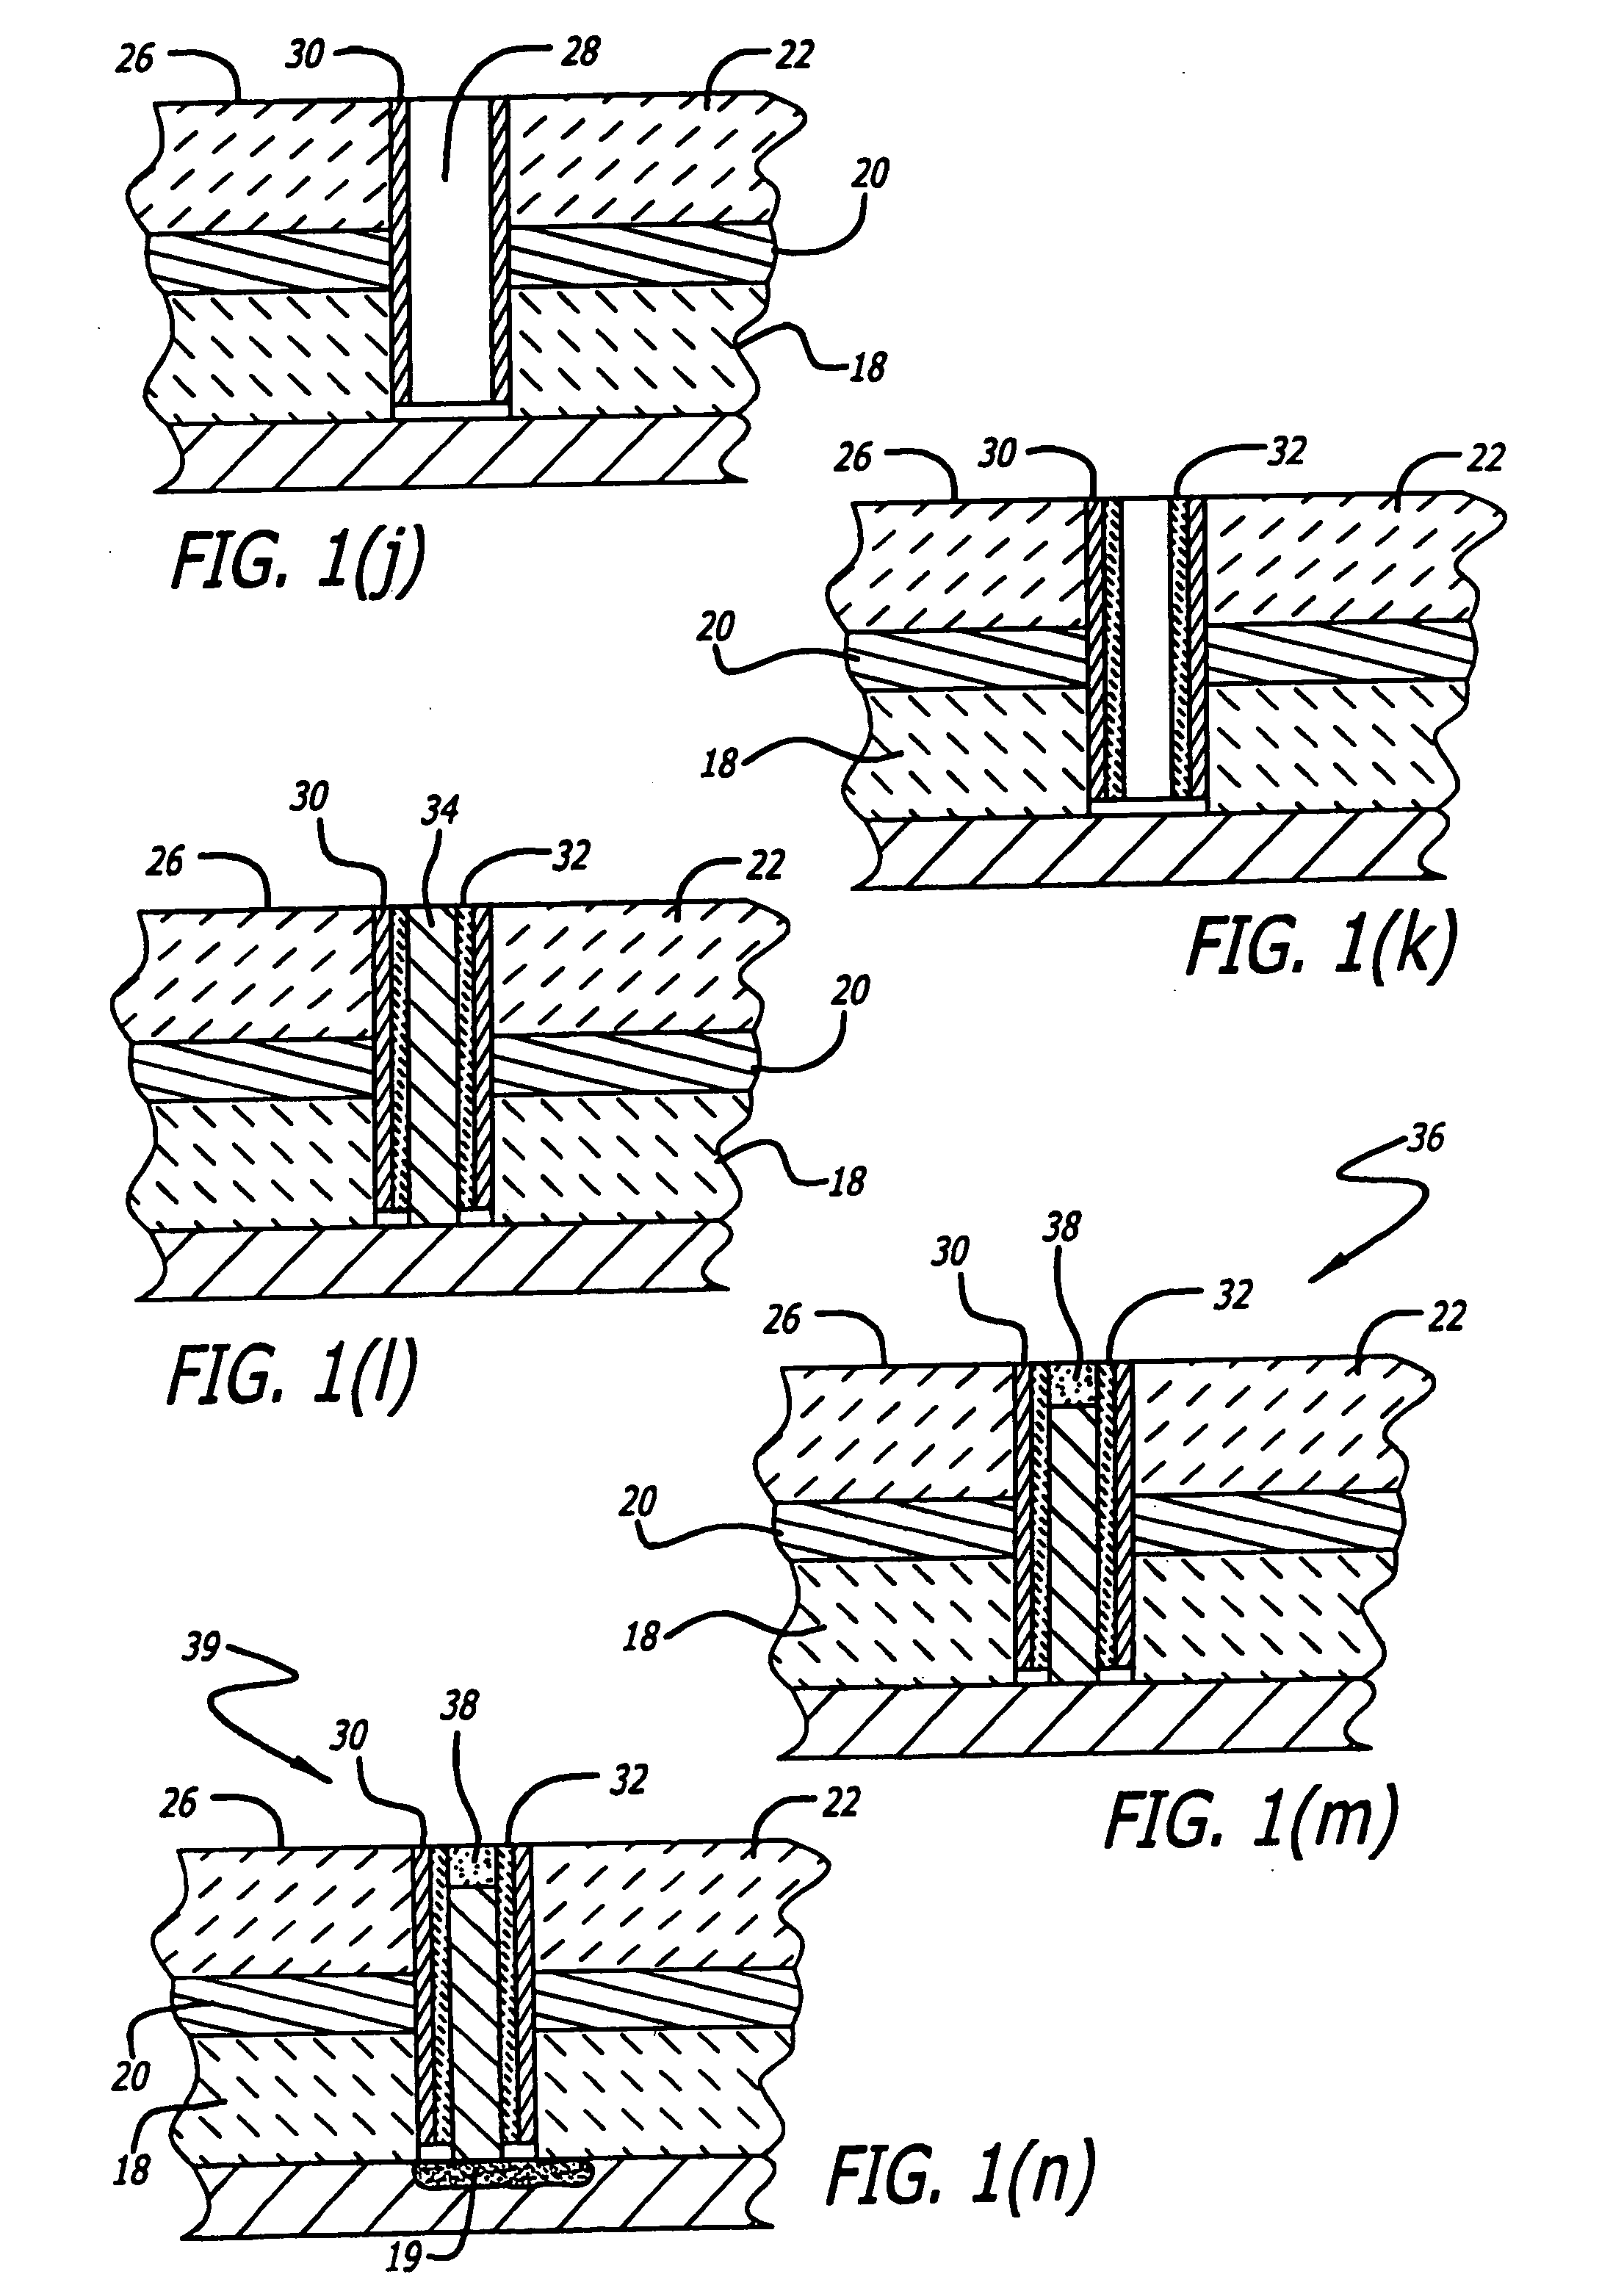 Field effect transistor fabrication including formation of a channel in a pore